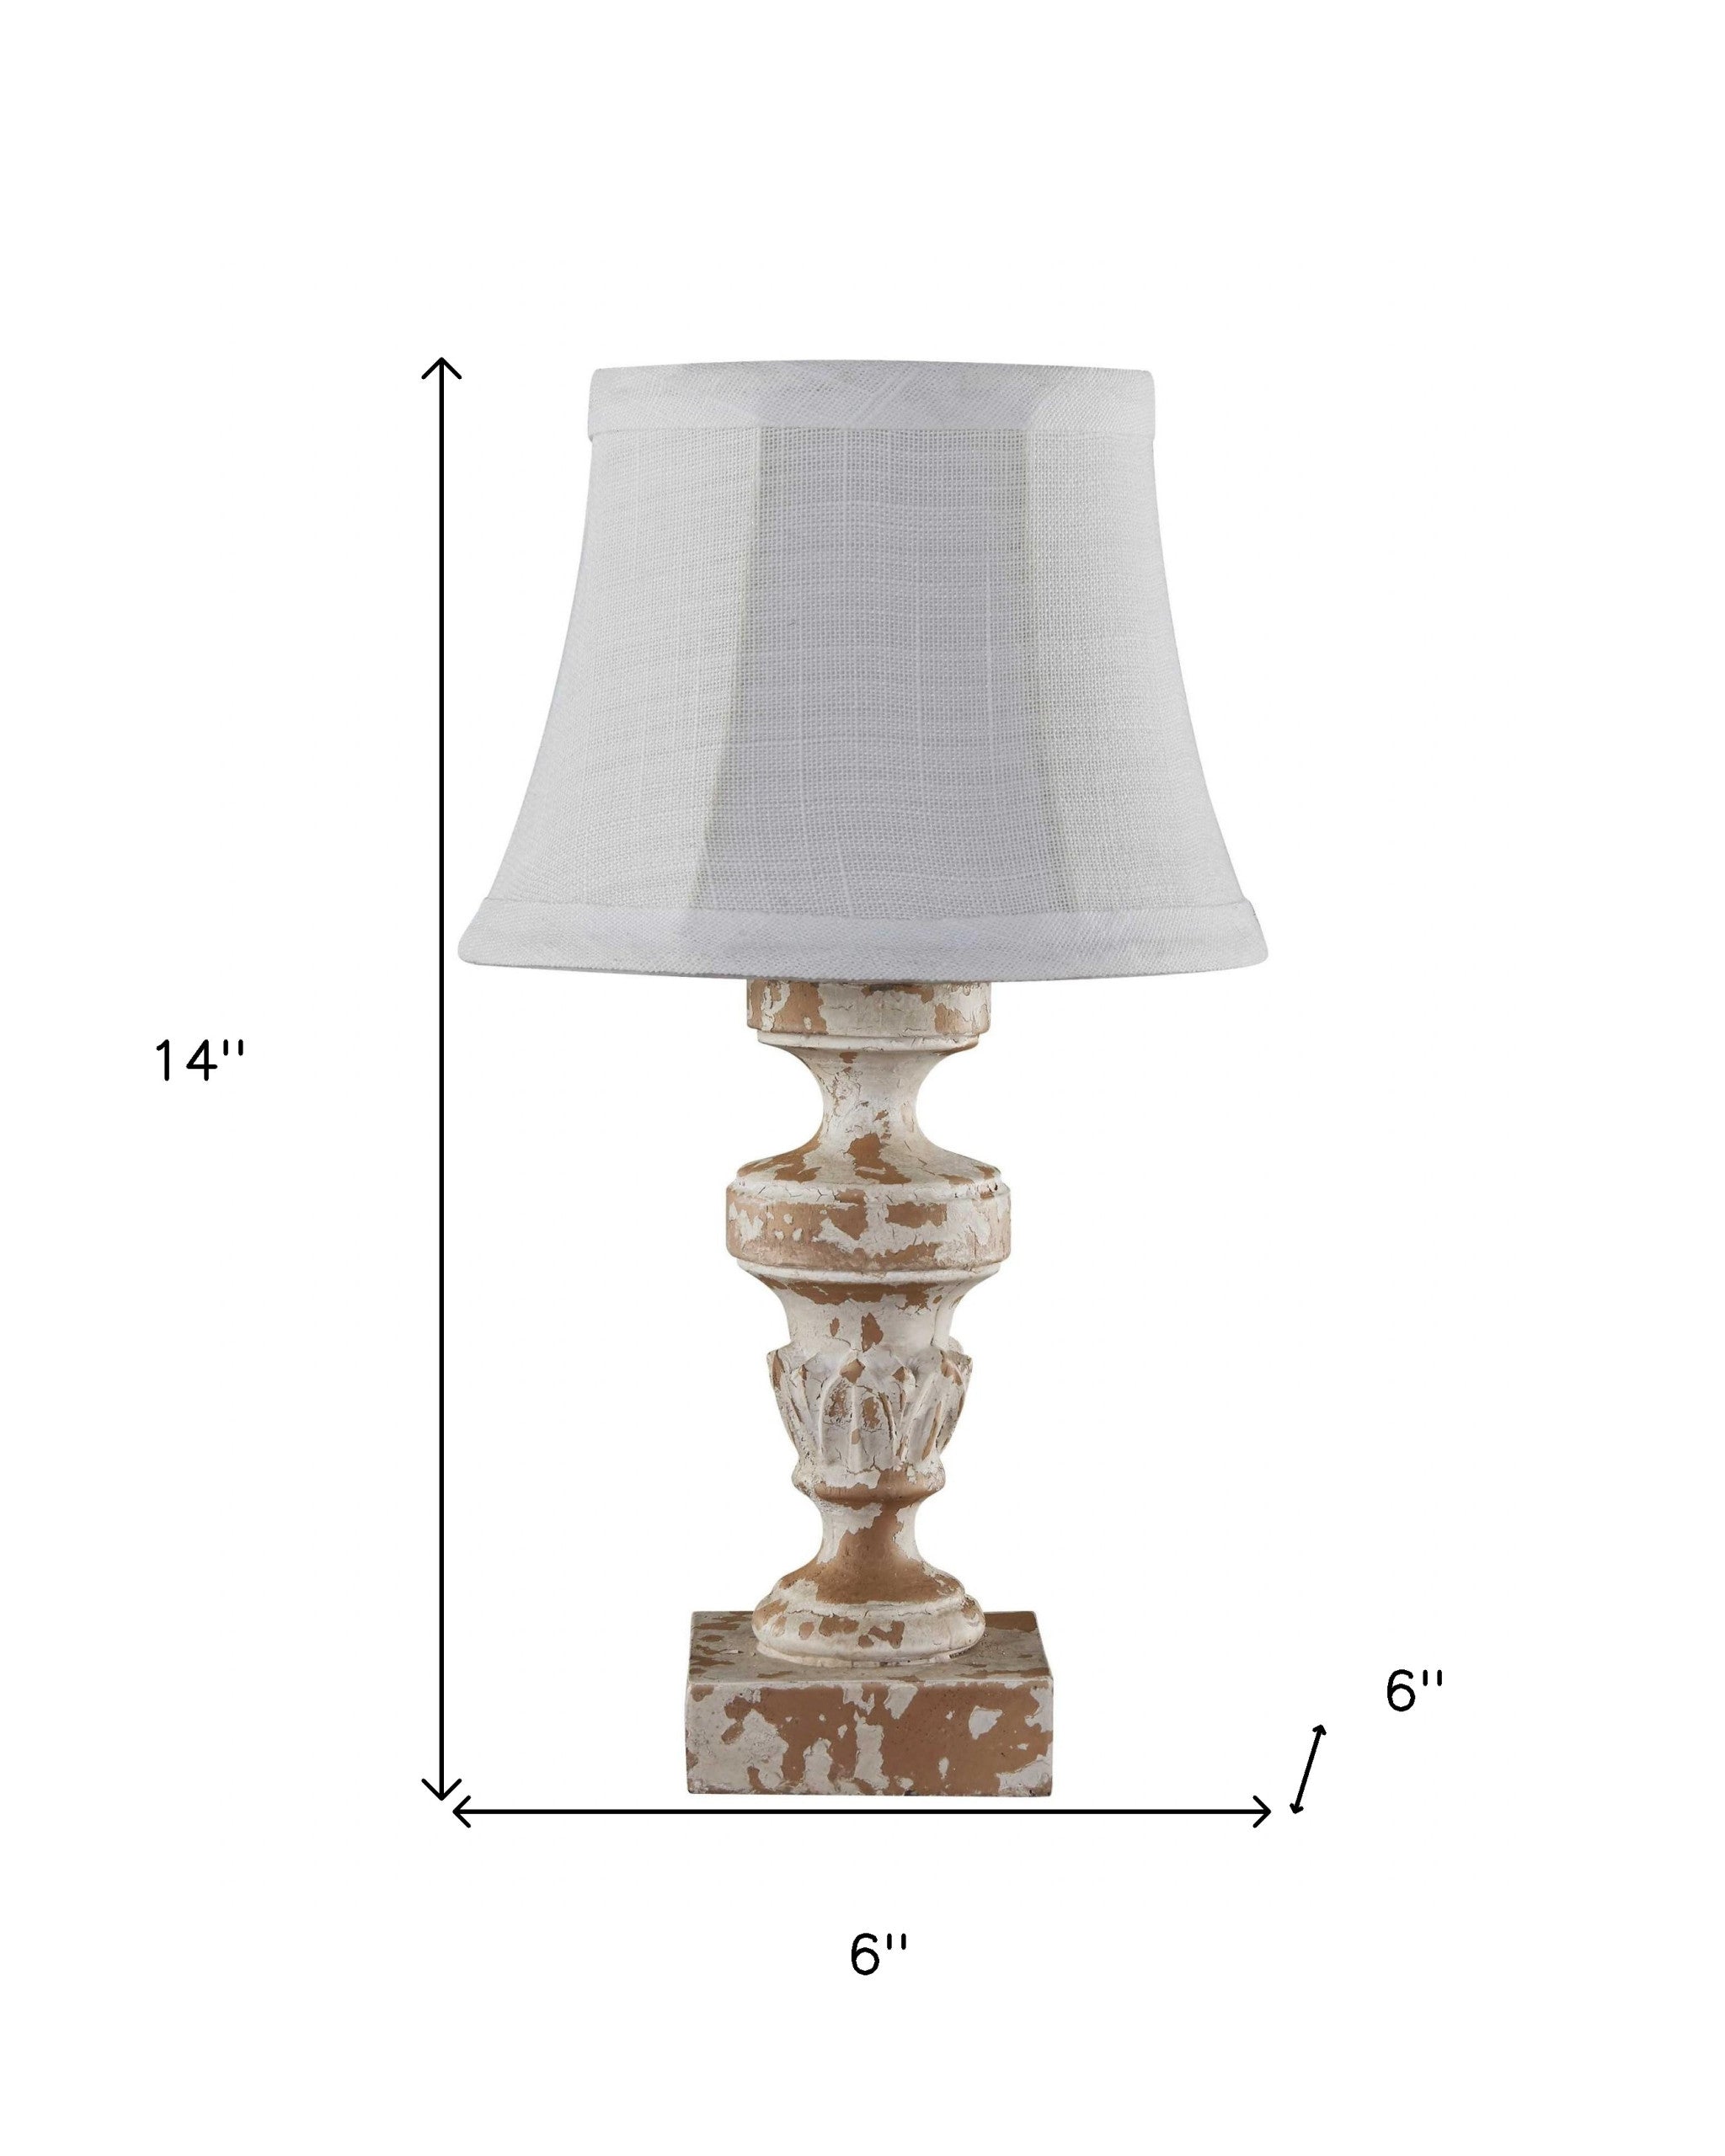 14" White Table Lamp With White Bell Shade